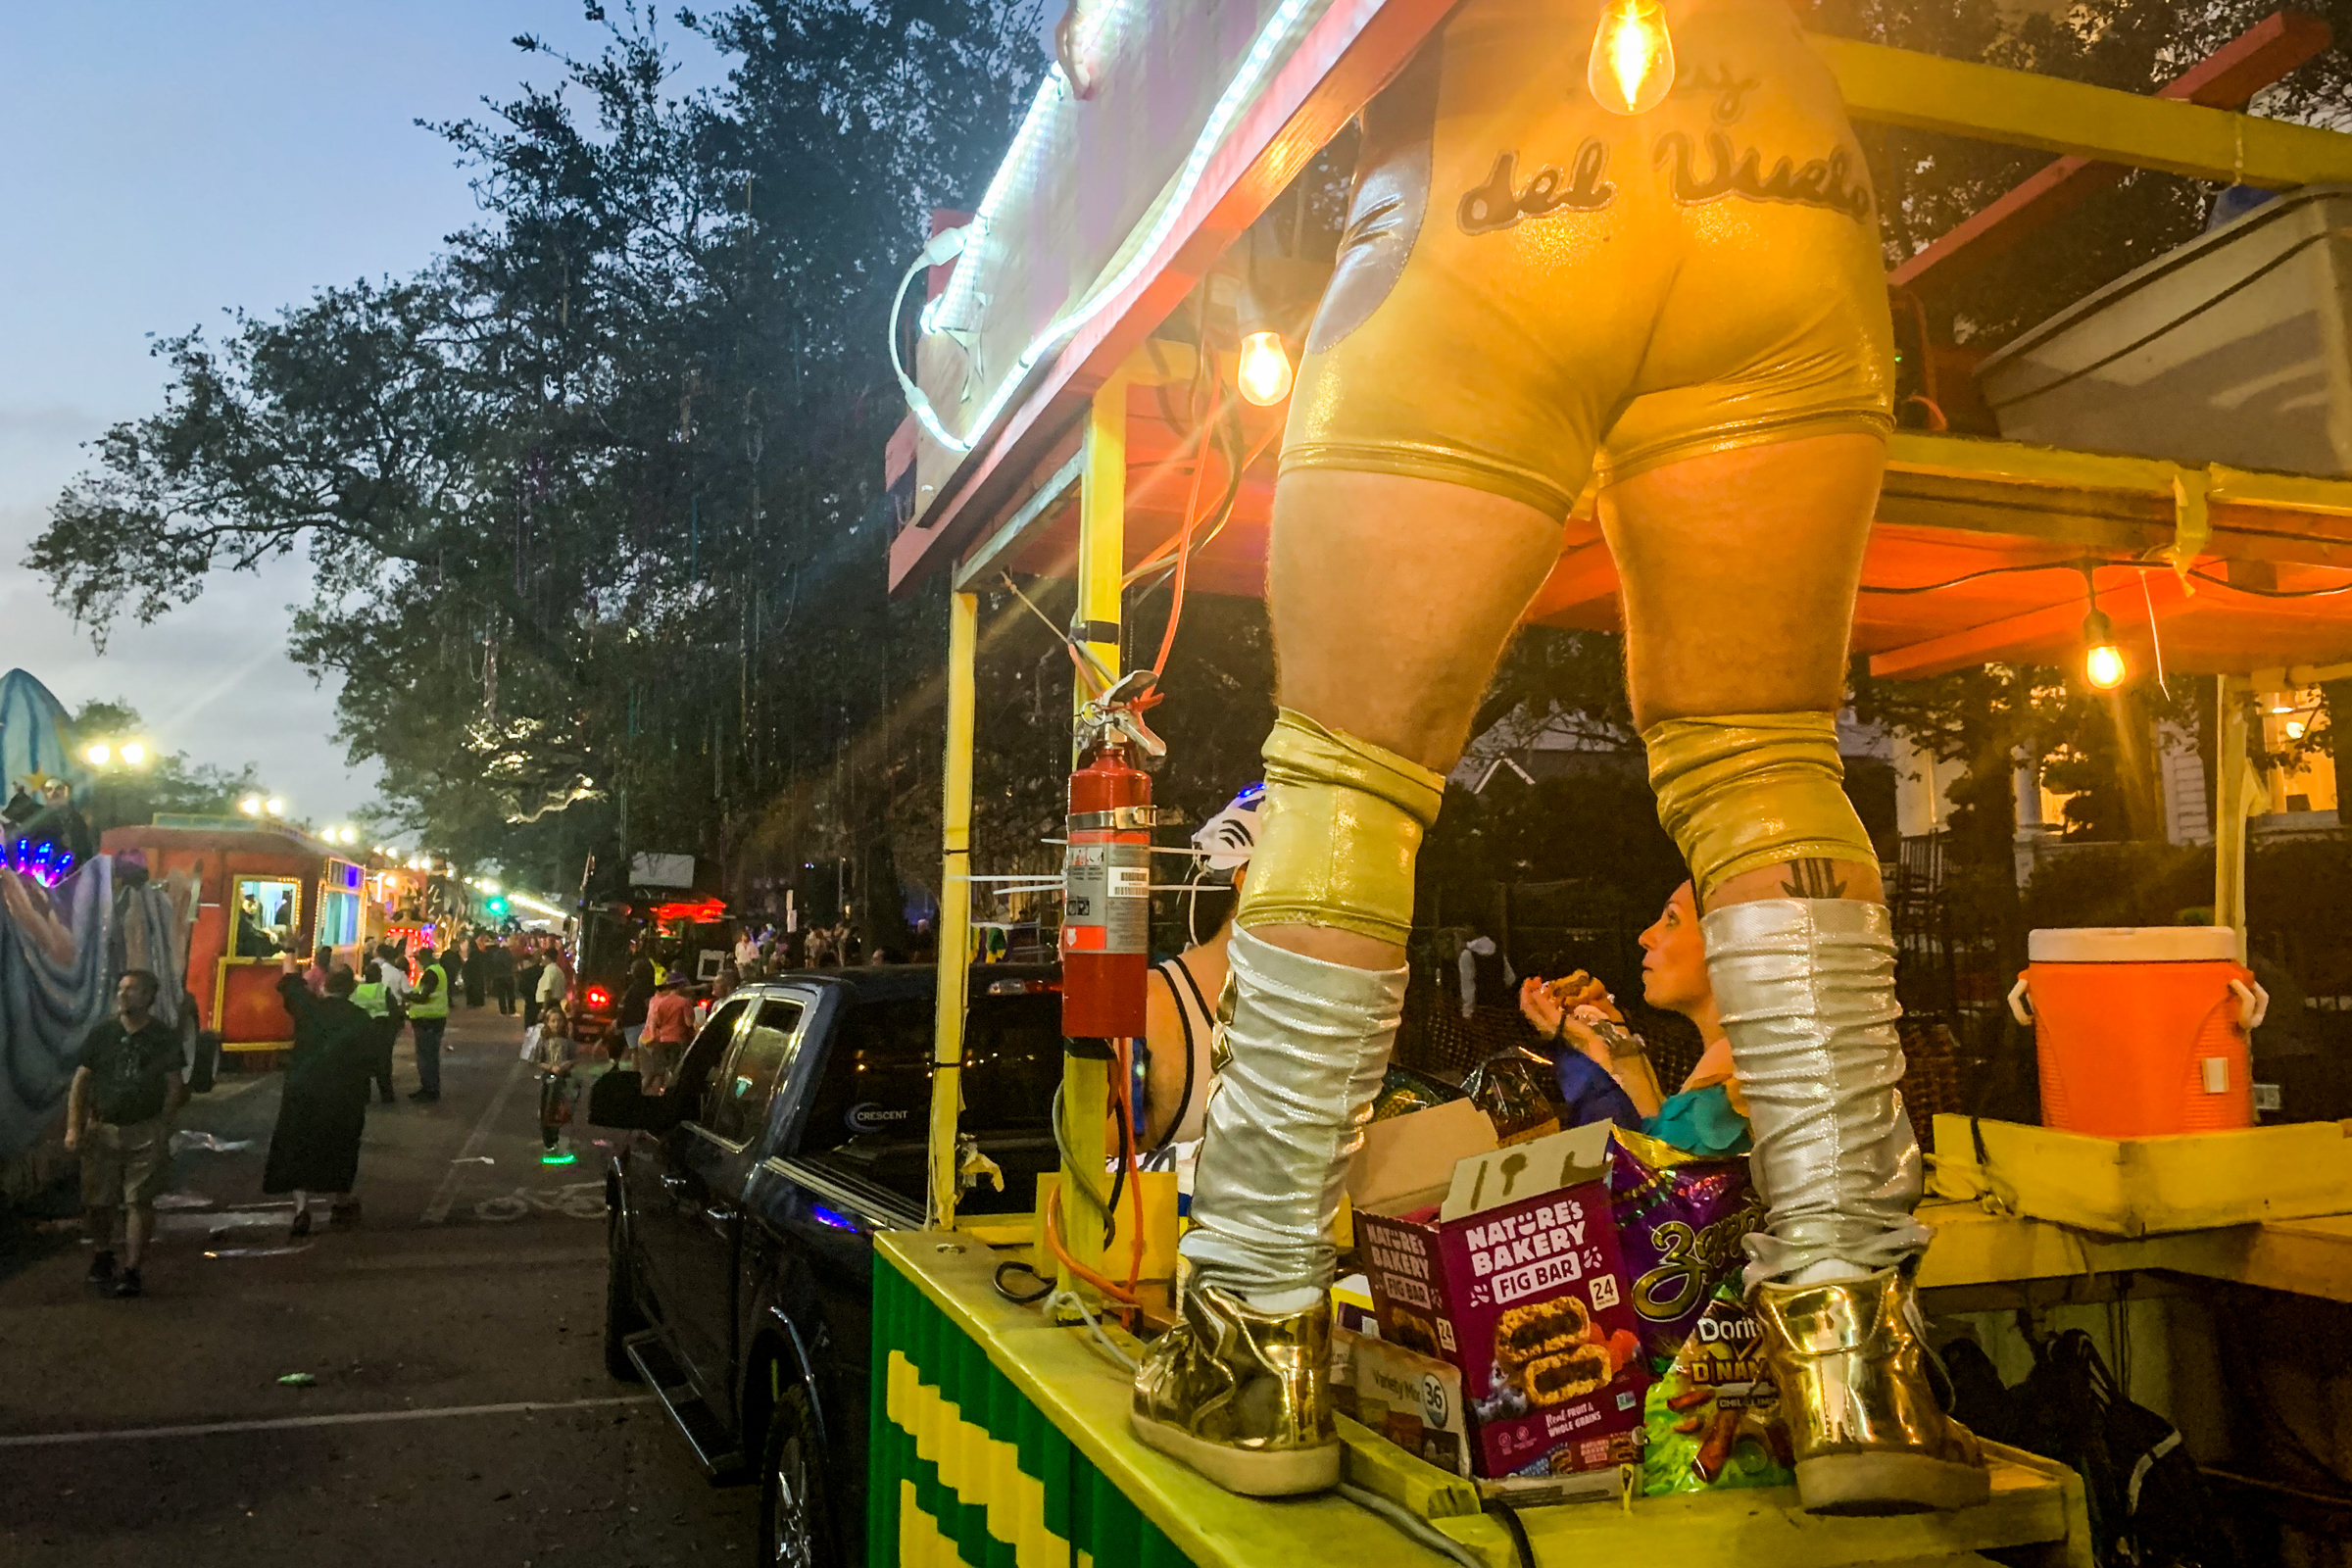 A member of Lucha Krewe stands on the trailer along the parade route